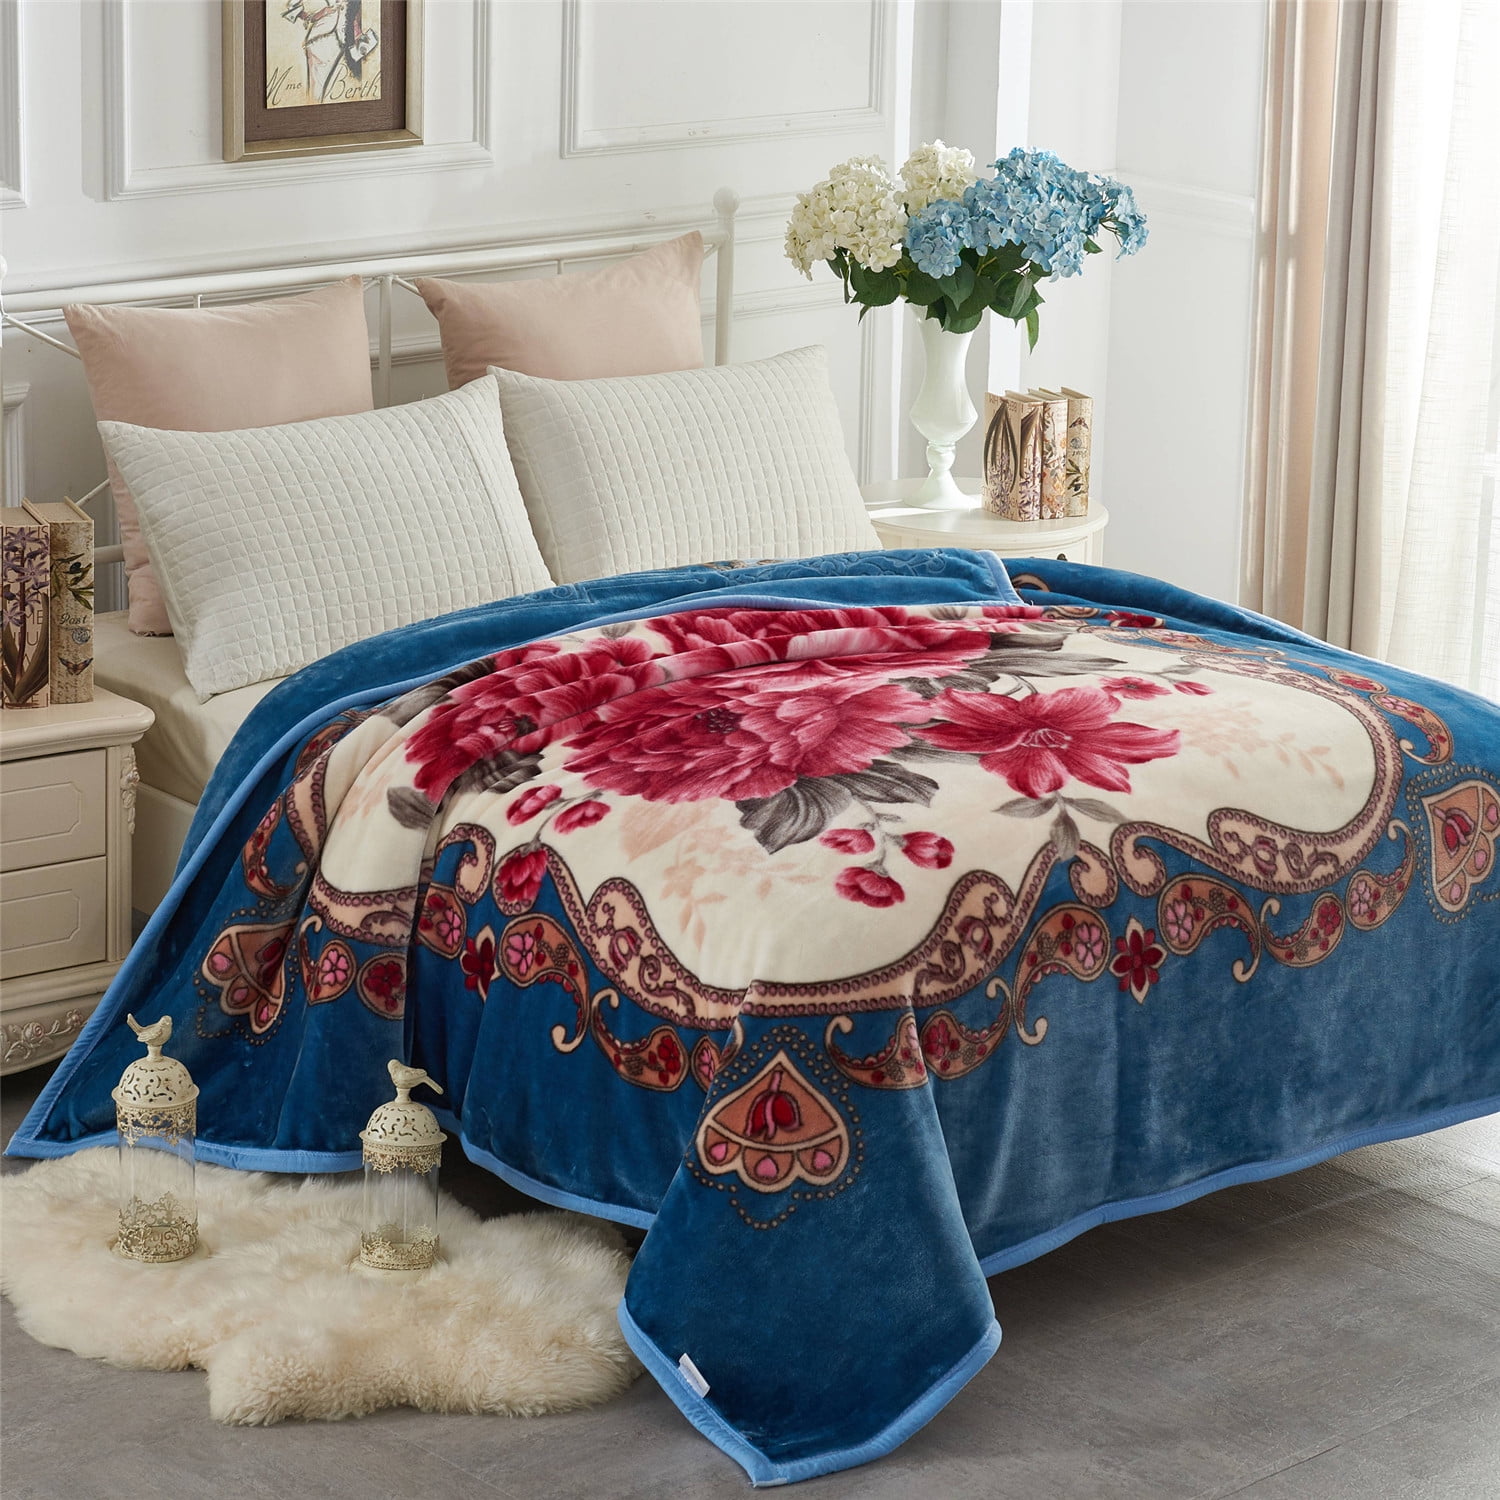 Lovely Canterbury Roses Bedspread Throw Quilted Comforter King Size 240 x 260 cm 